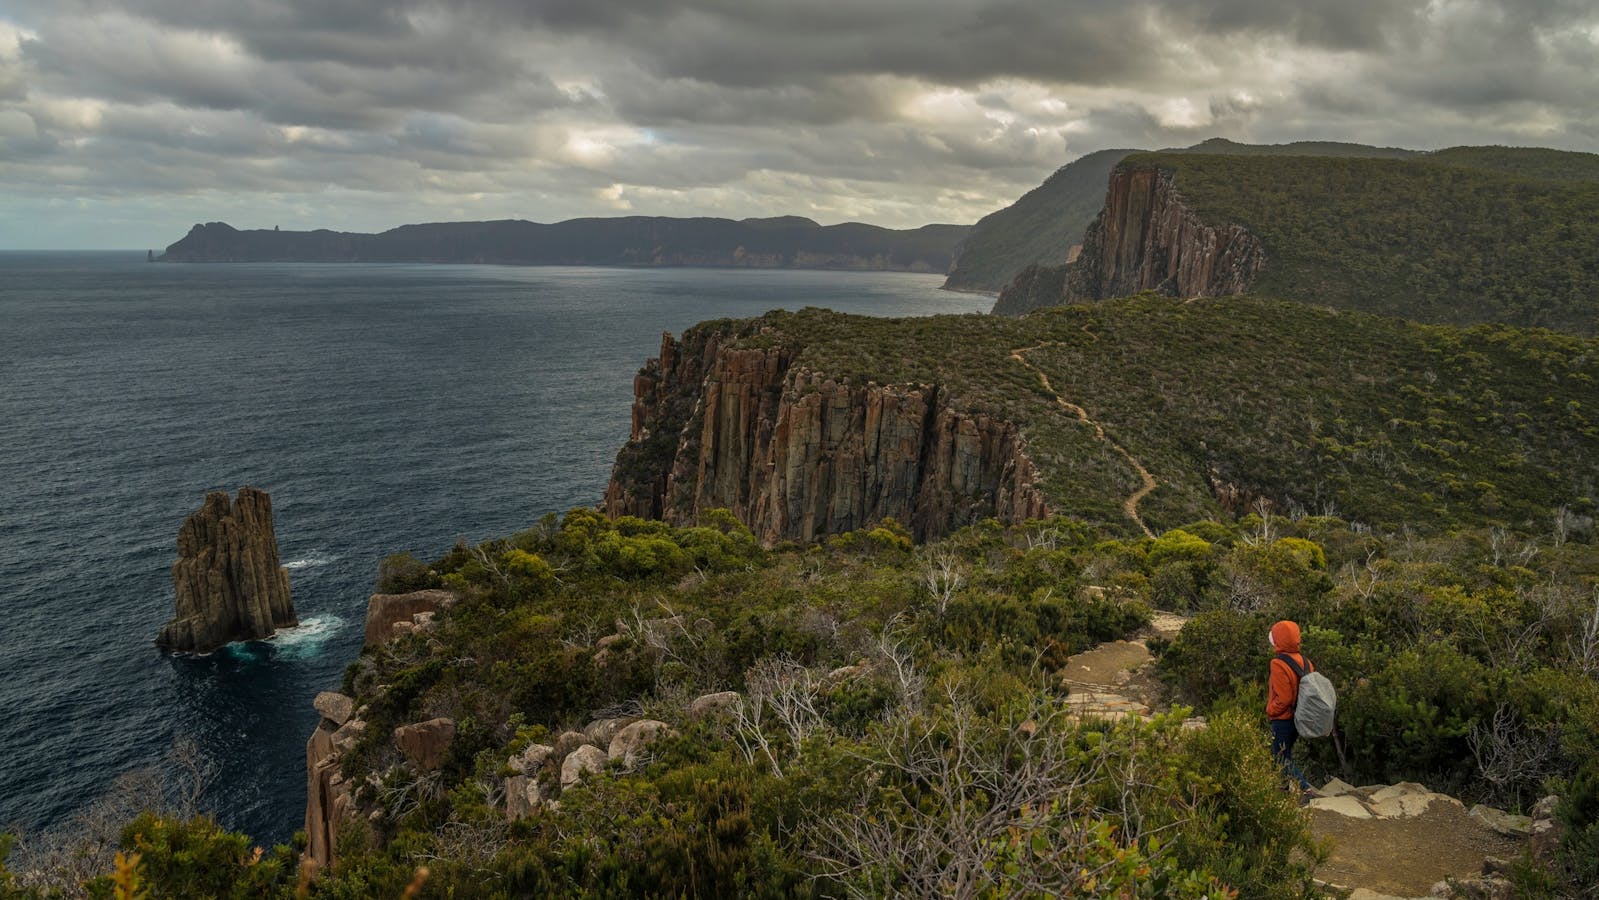 The views from Cape Hauy